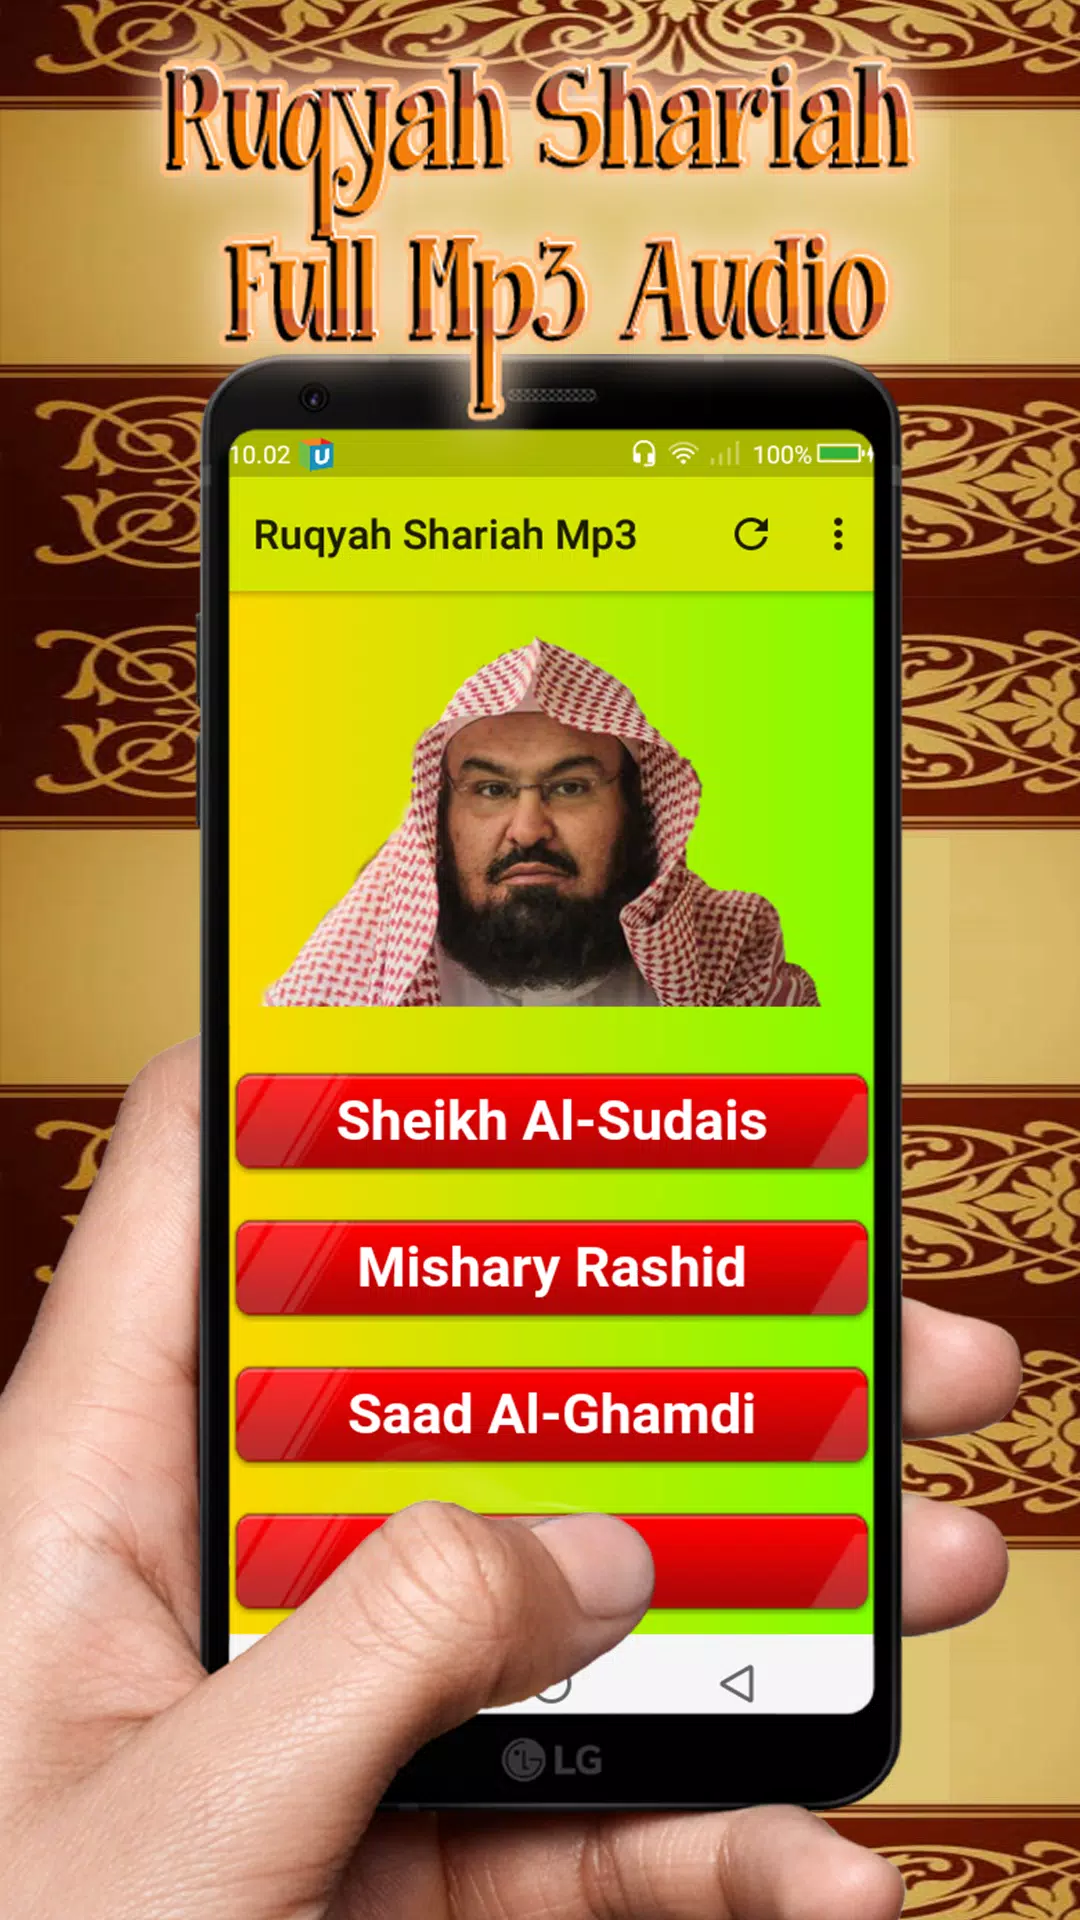 Ruqyah Shariah Full Mp3 Audio APK for Android Download